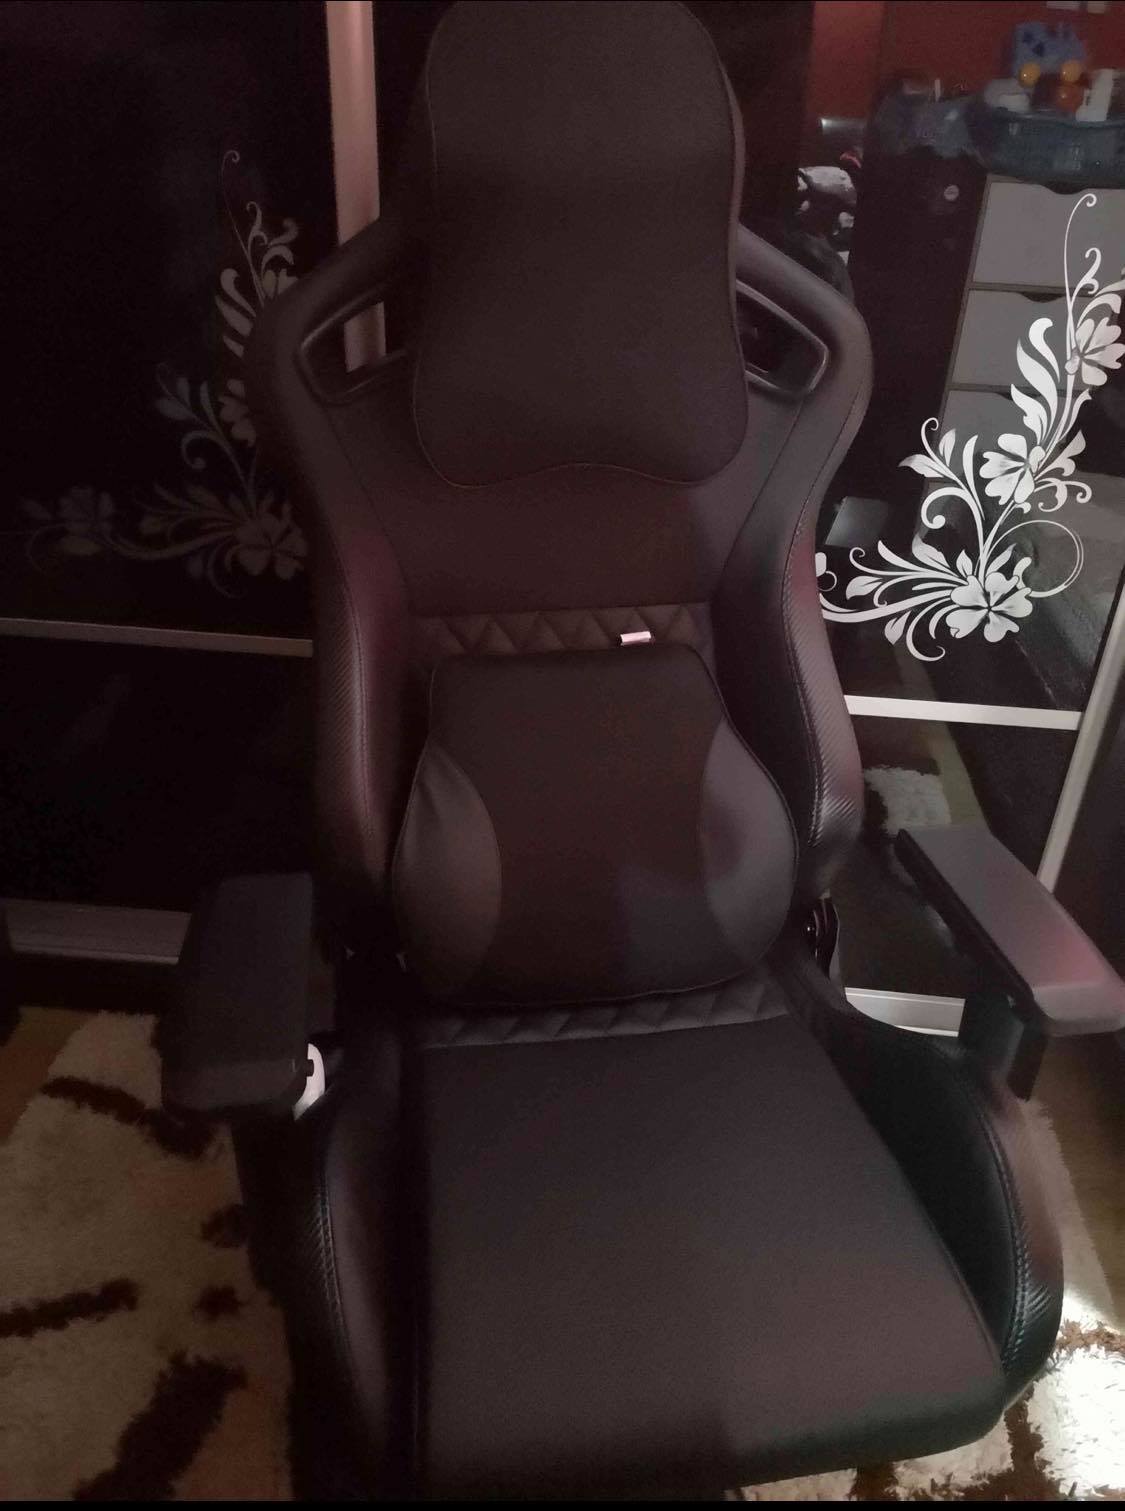 Louis Vuitton car headrest for Sale in Campbell, CA - OfferUp